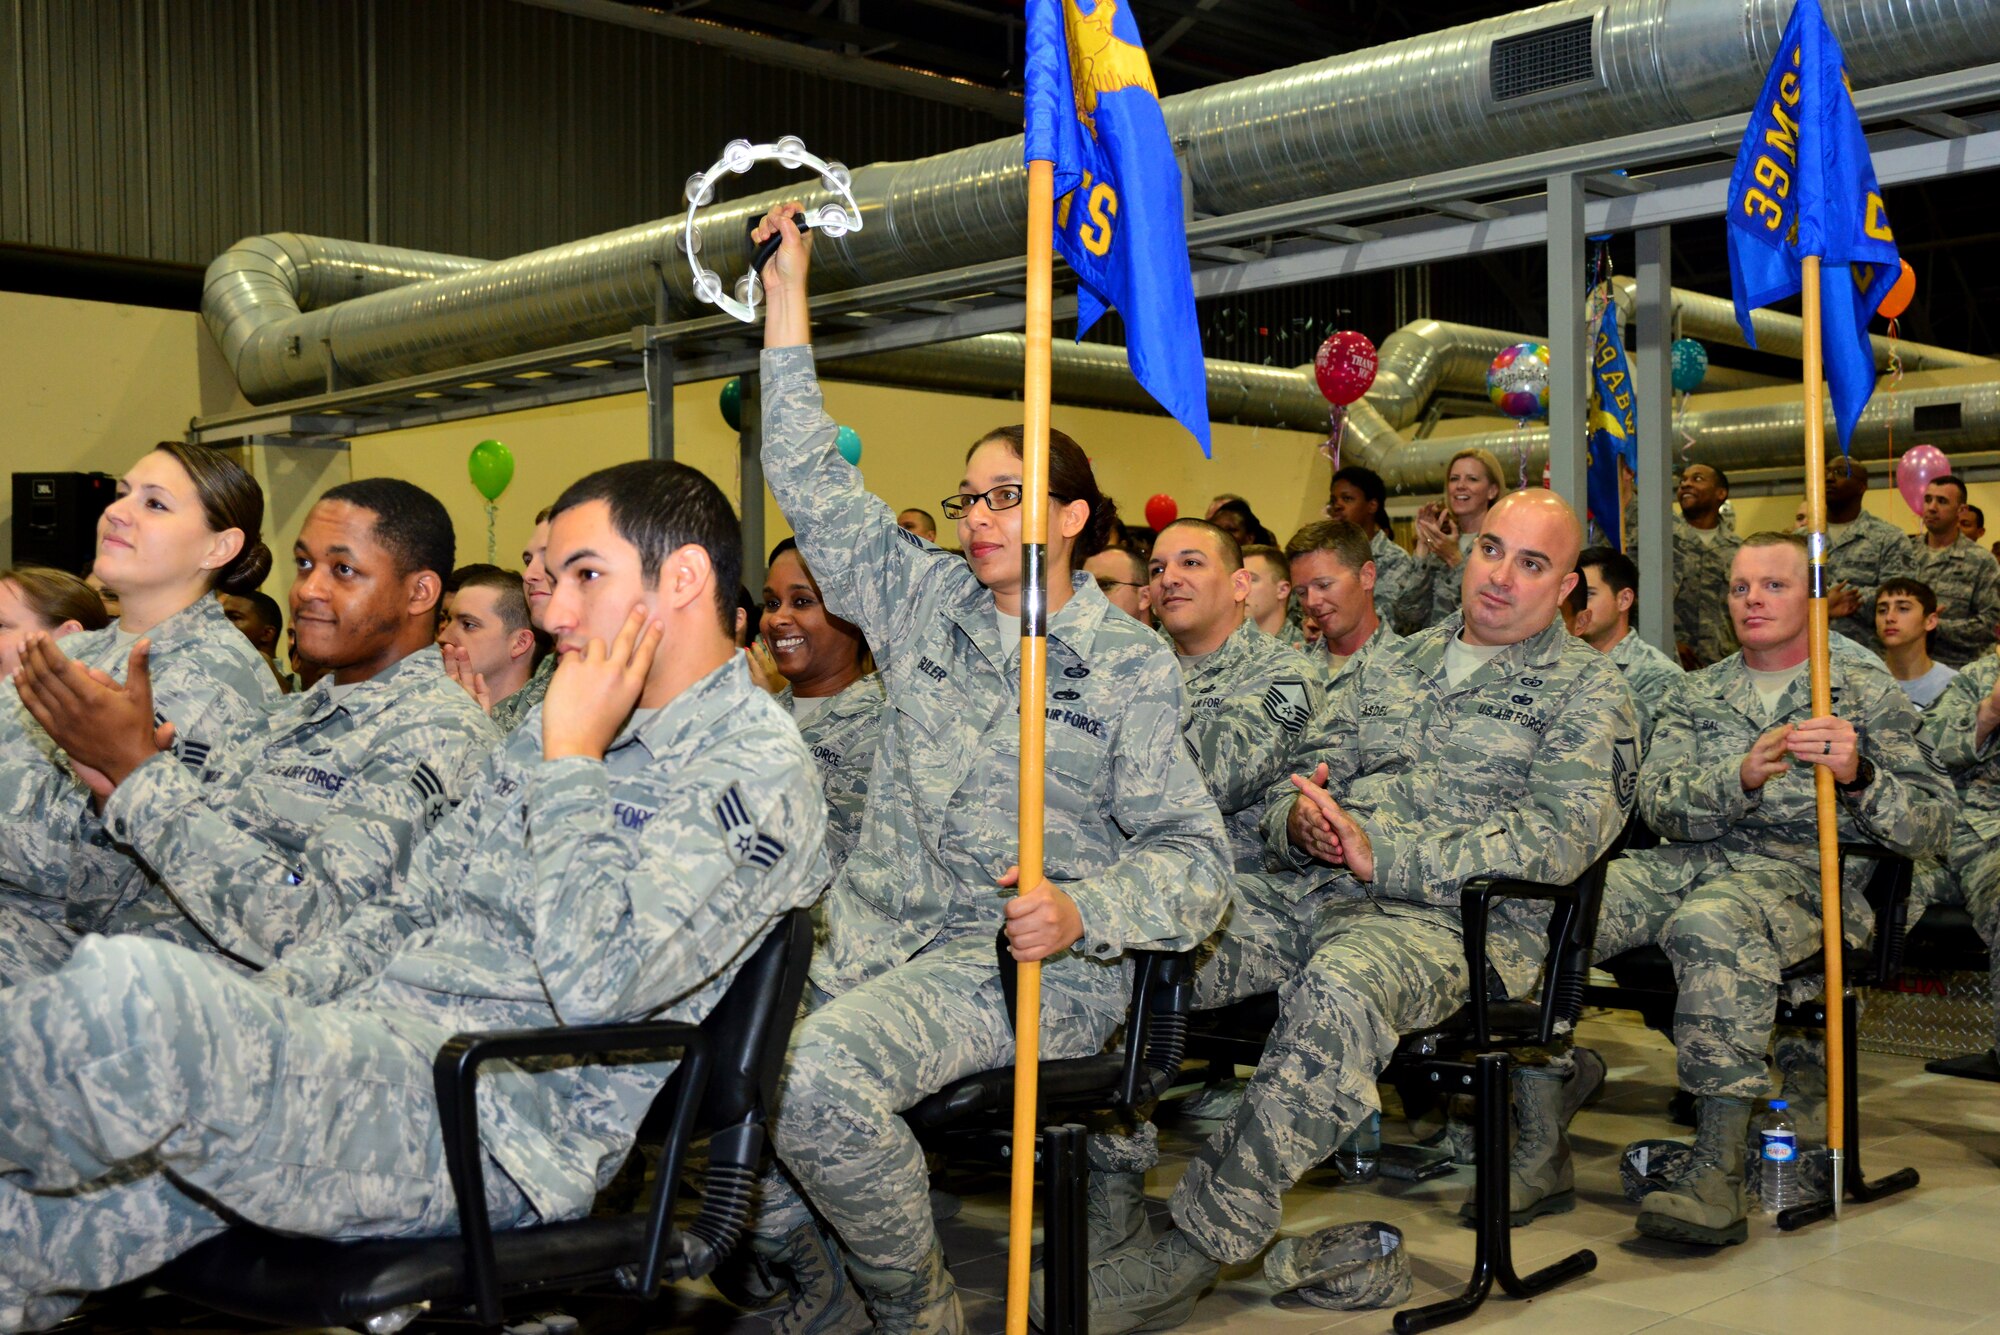 Master Sgt. Kimberly Guler, 39th Air Base Wing Equal Opportunity
director, shakes a tambourine while cheering with other members of the 39th
ABW during the inspection outbrief May 5, 2014, Incirlik Air Base, Turkey.
Members of the United States Air Forces in Europe Inspector General team
visited Incirlik AB April 26 - May 5 to inspect the wing on one of its core
missions. (U.S. Air Force photo by Staff Sgt. Eric Summers Jr./Released)
